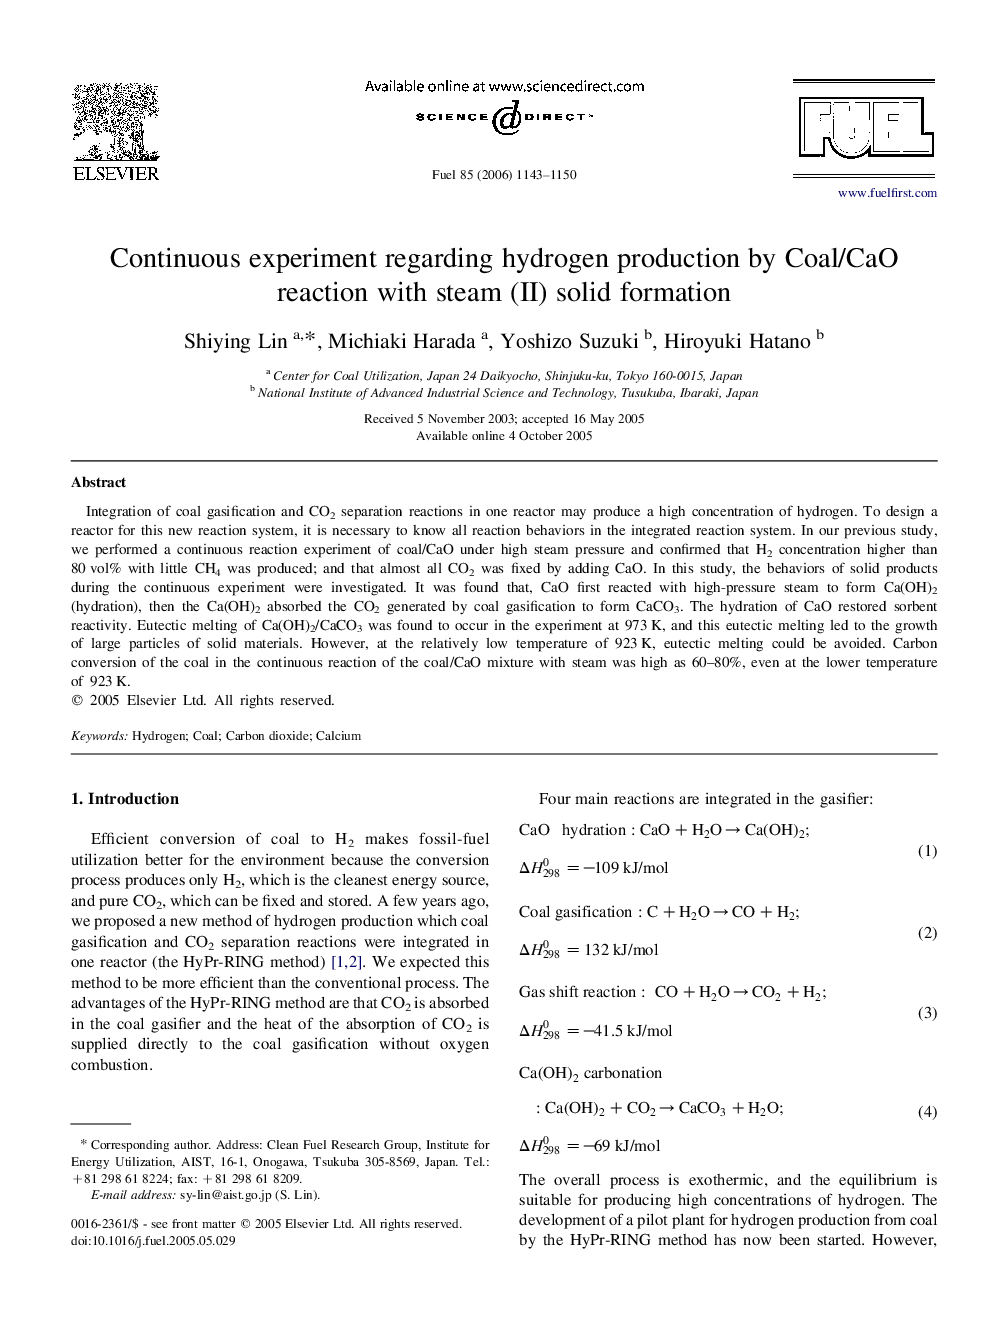 Continuous experiment regarding hydrogen production by Coal/CaO reaction with steam (II) solid formation